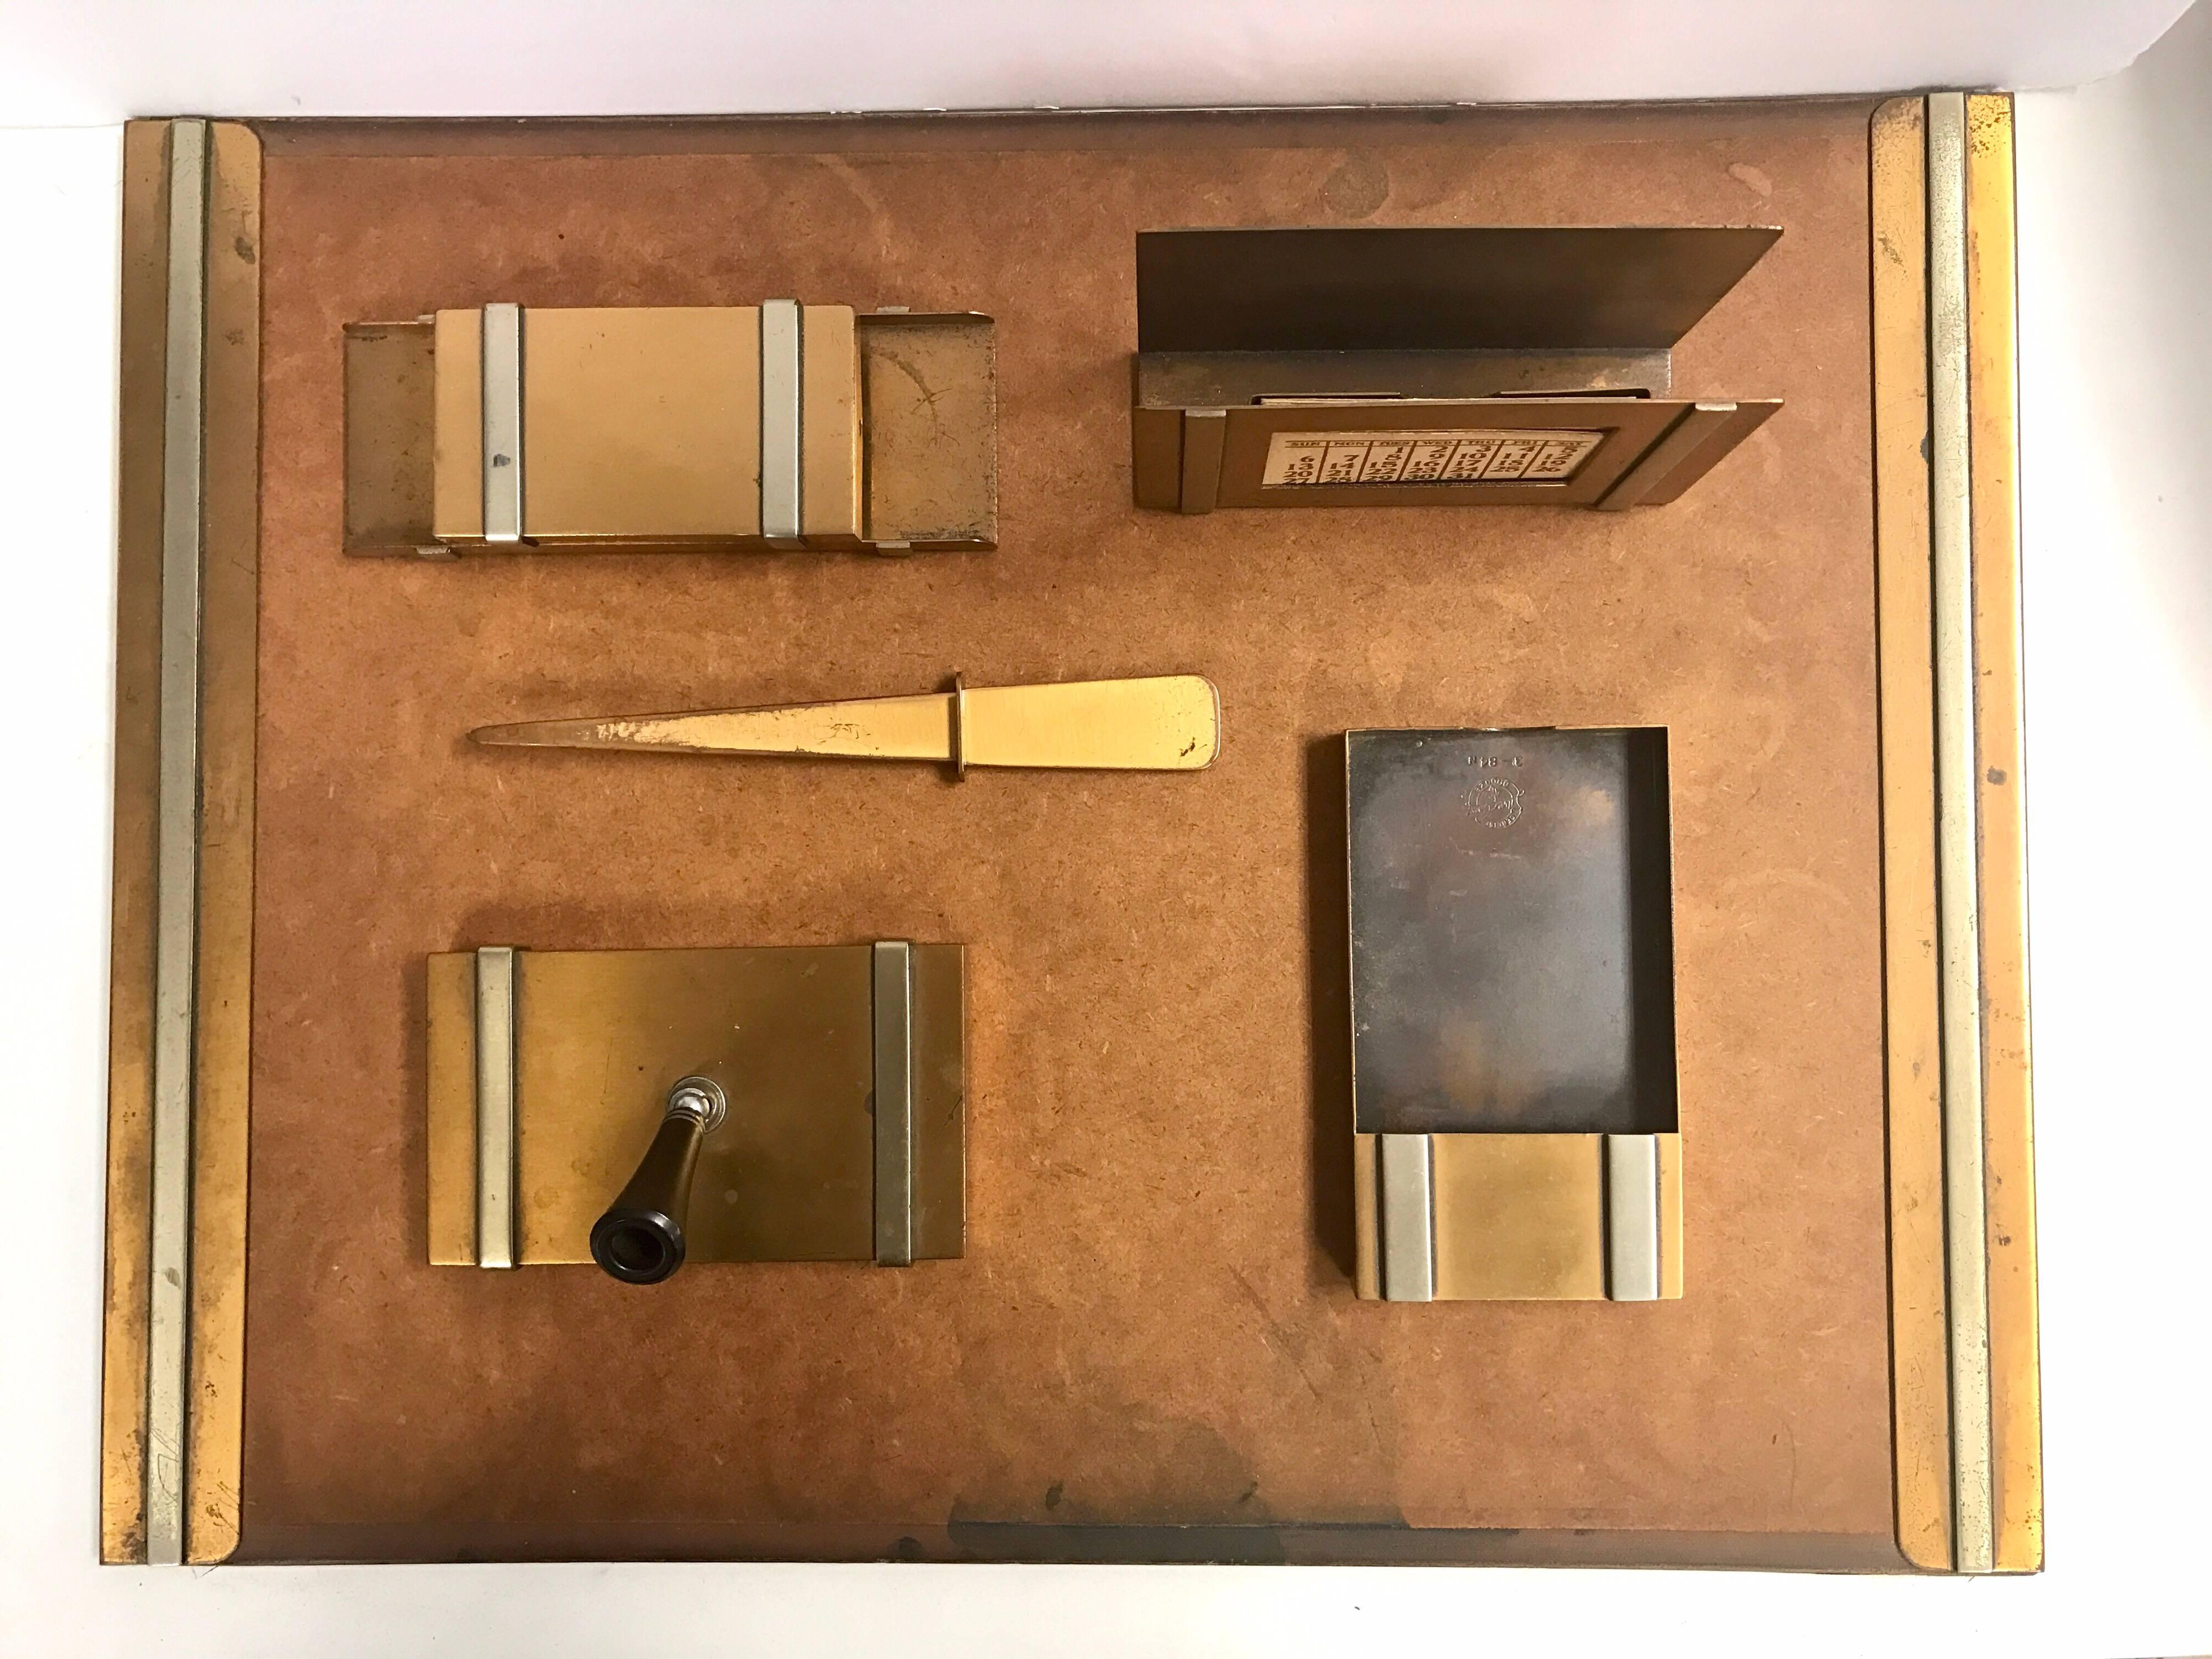 Art Deco bronze six-piece desk set from the 1930s by Silvercrest consists of a desk blotter, calendar holder or letter holder, pen holder, memo pad holder, ink blotter and letter opener. The writing pad measures 16 inches x 21 inches.